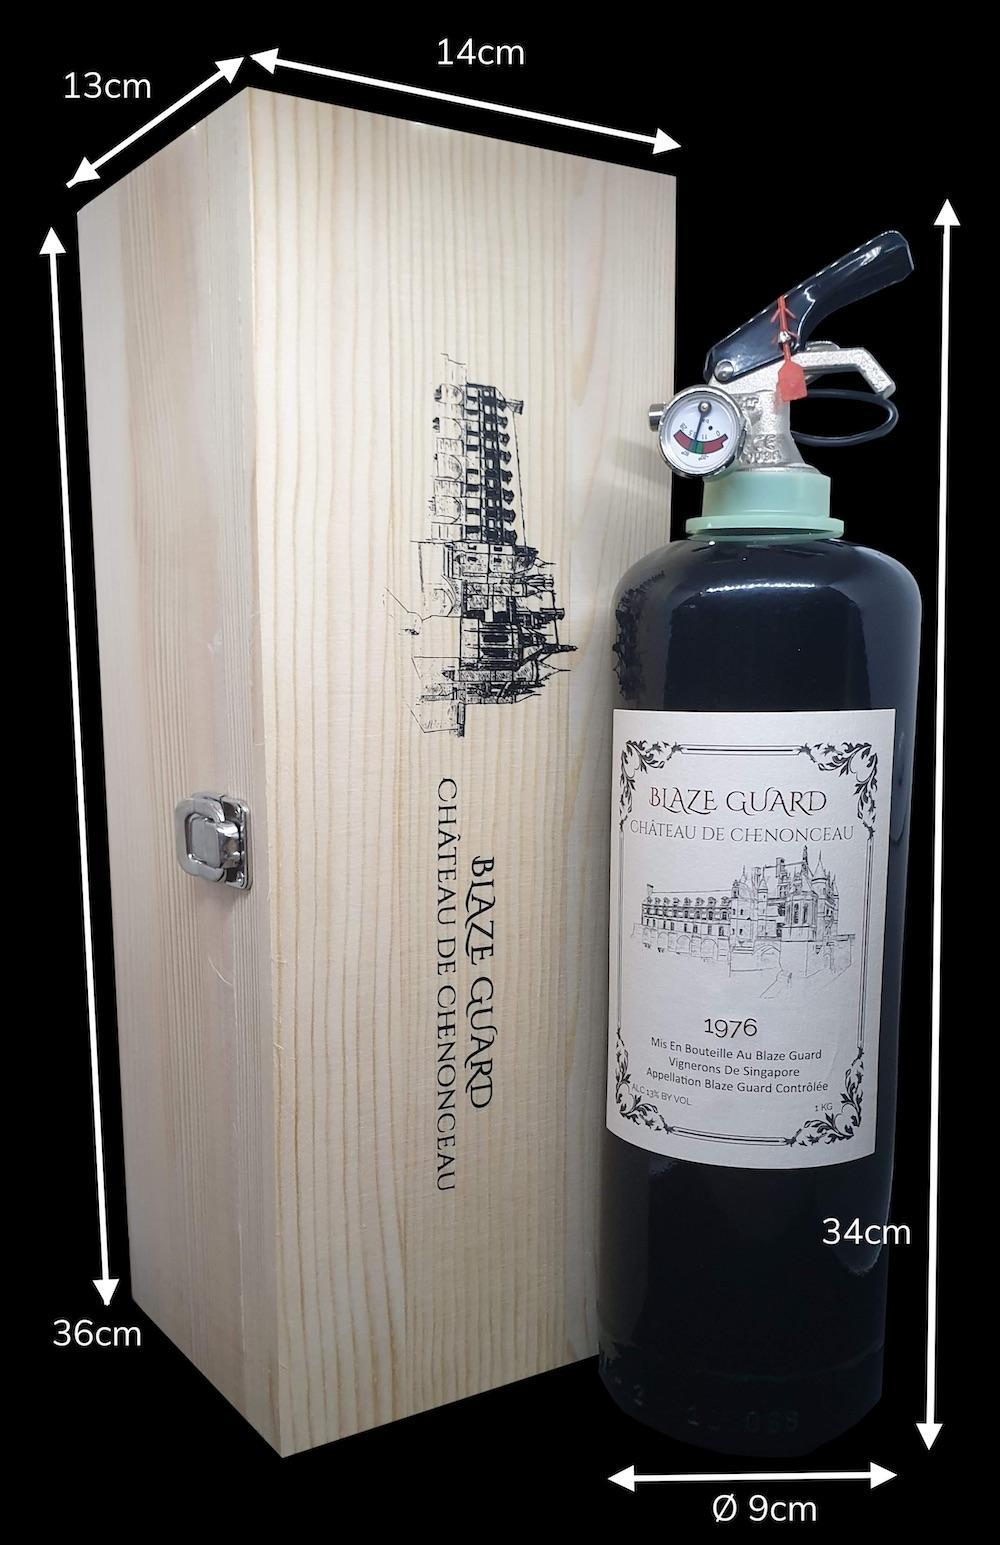 Red Wine Bottle Fire Extinguisher - Dimensions